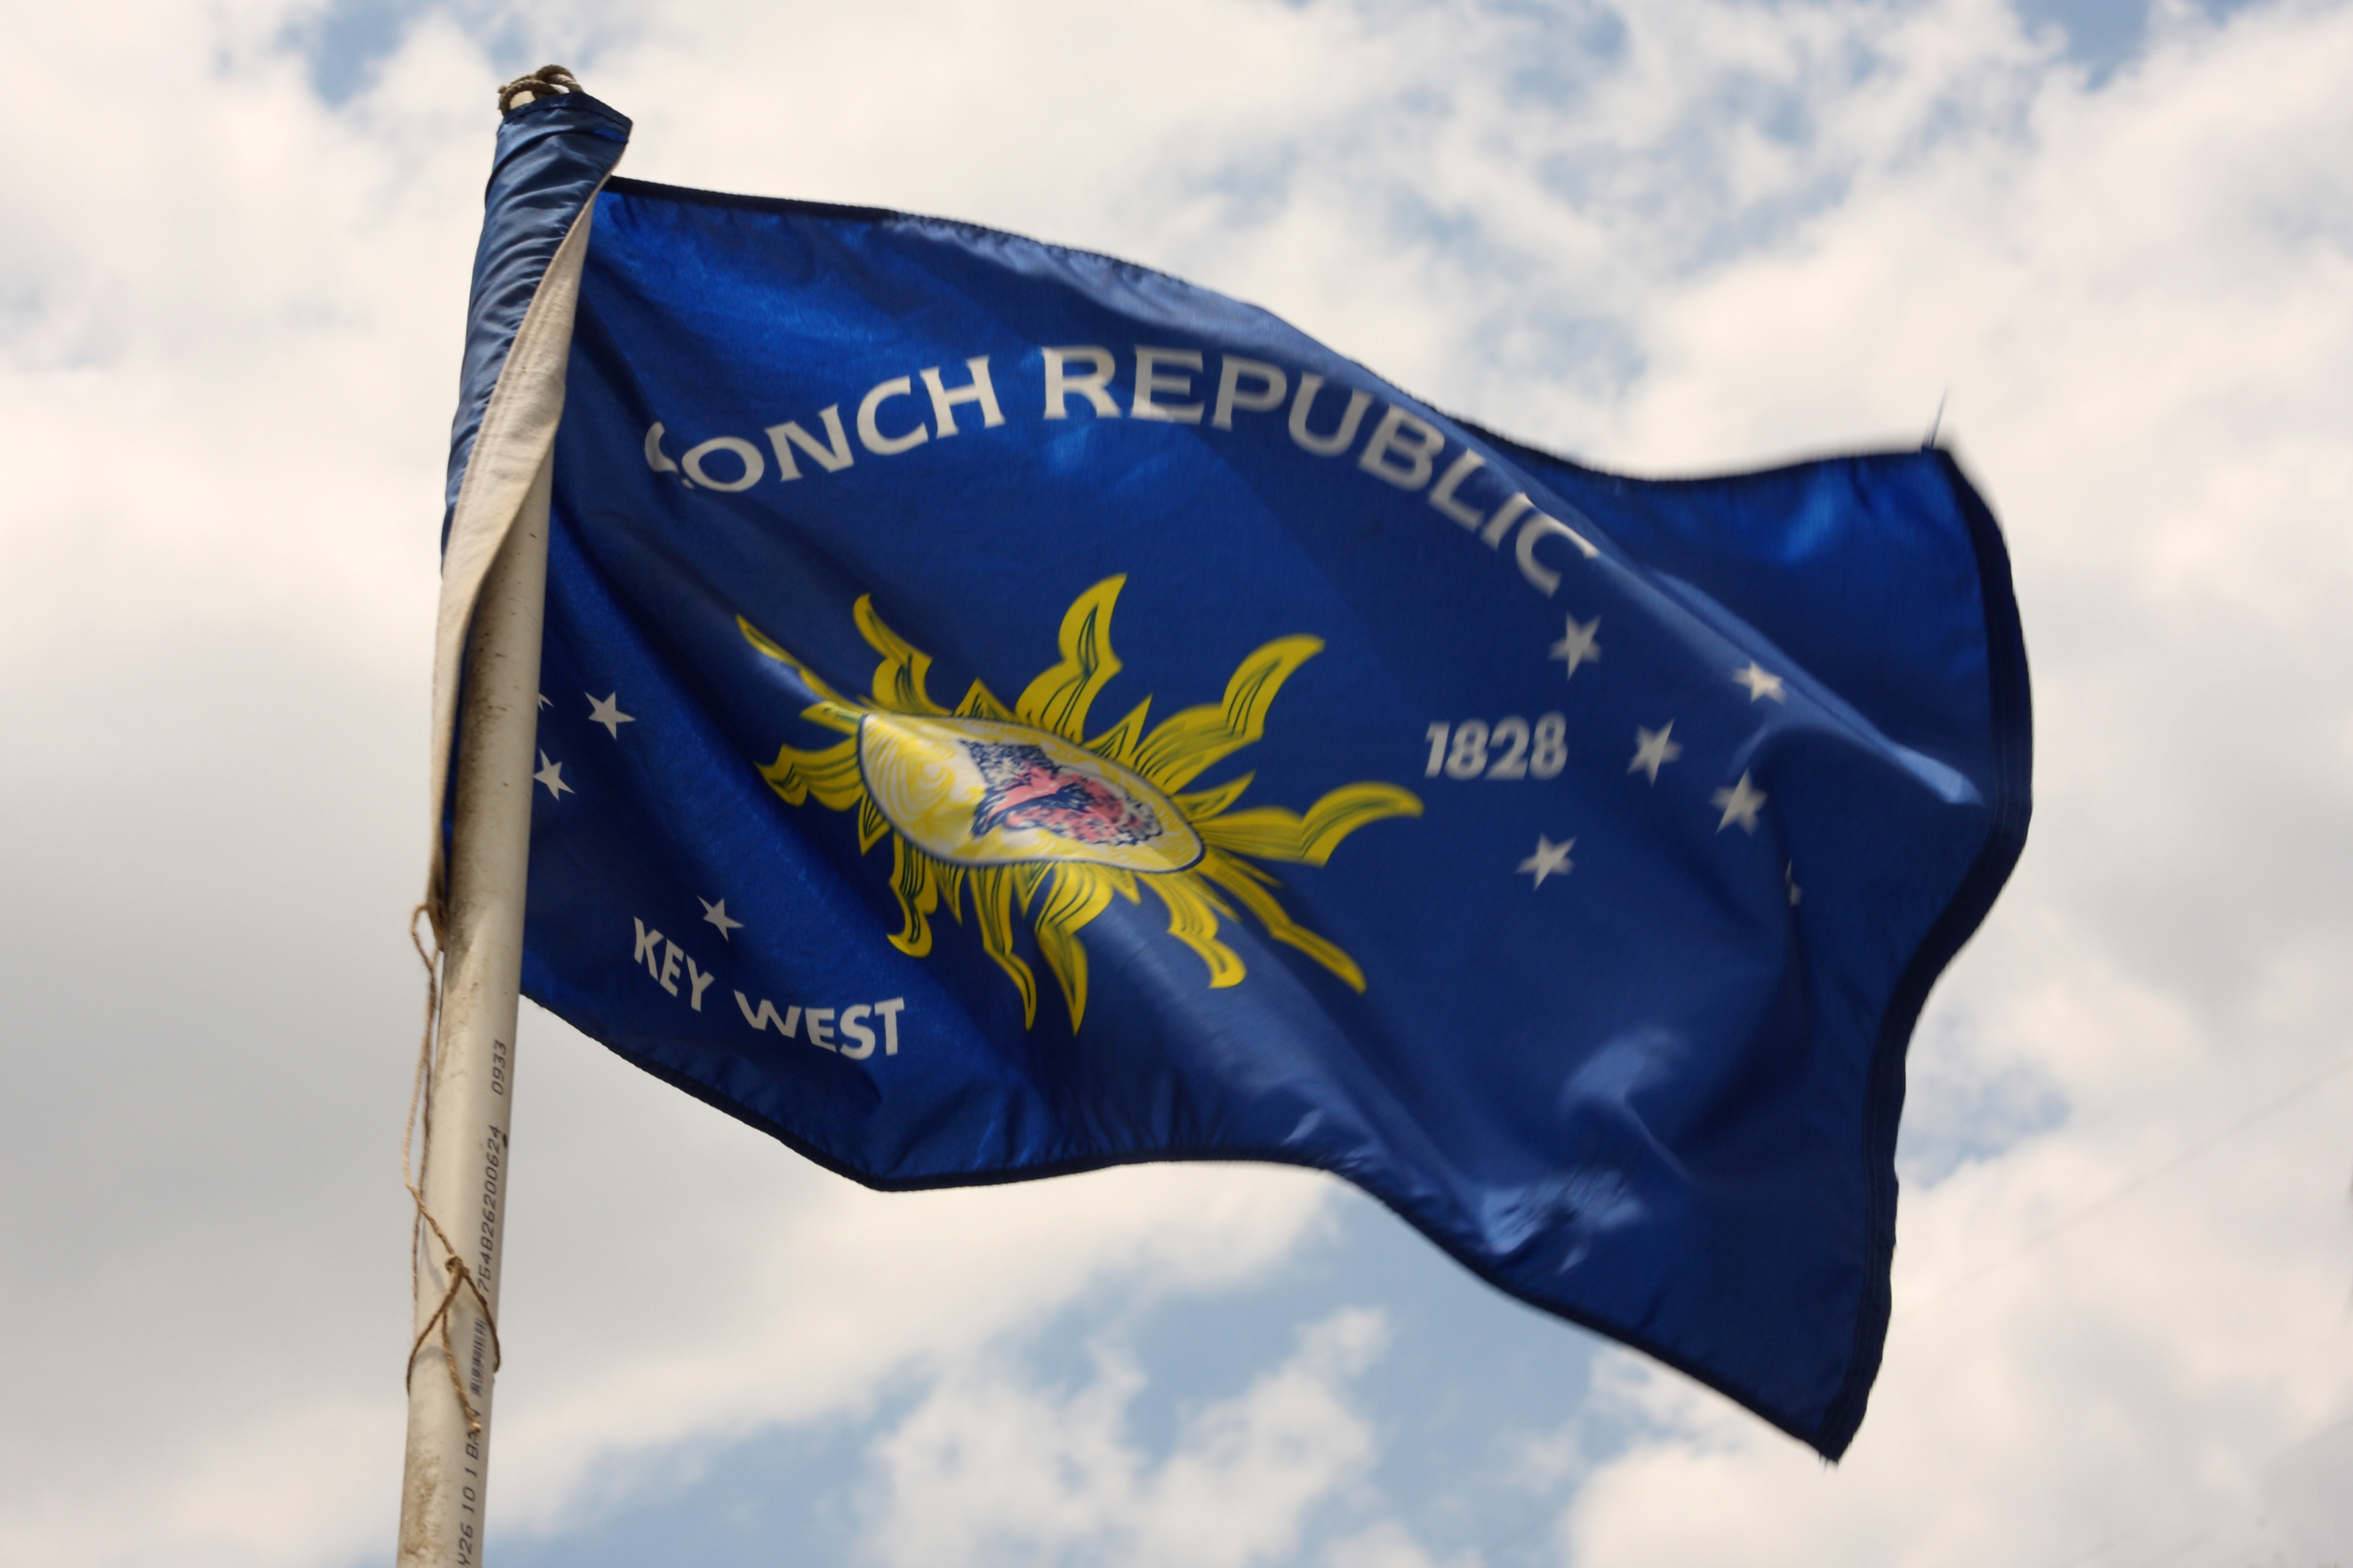 Conch Republic Flag | photo page - everystockphoto